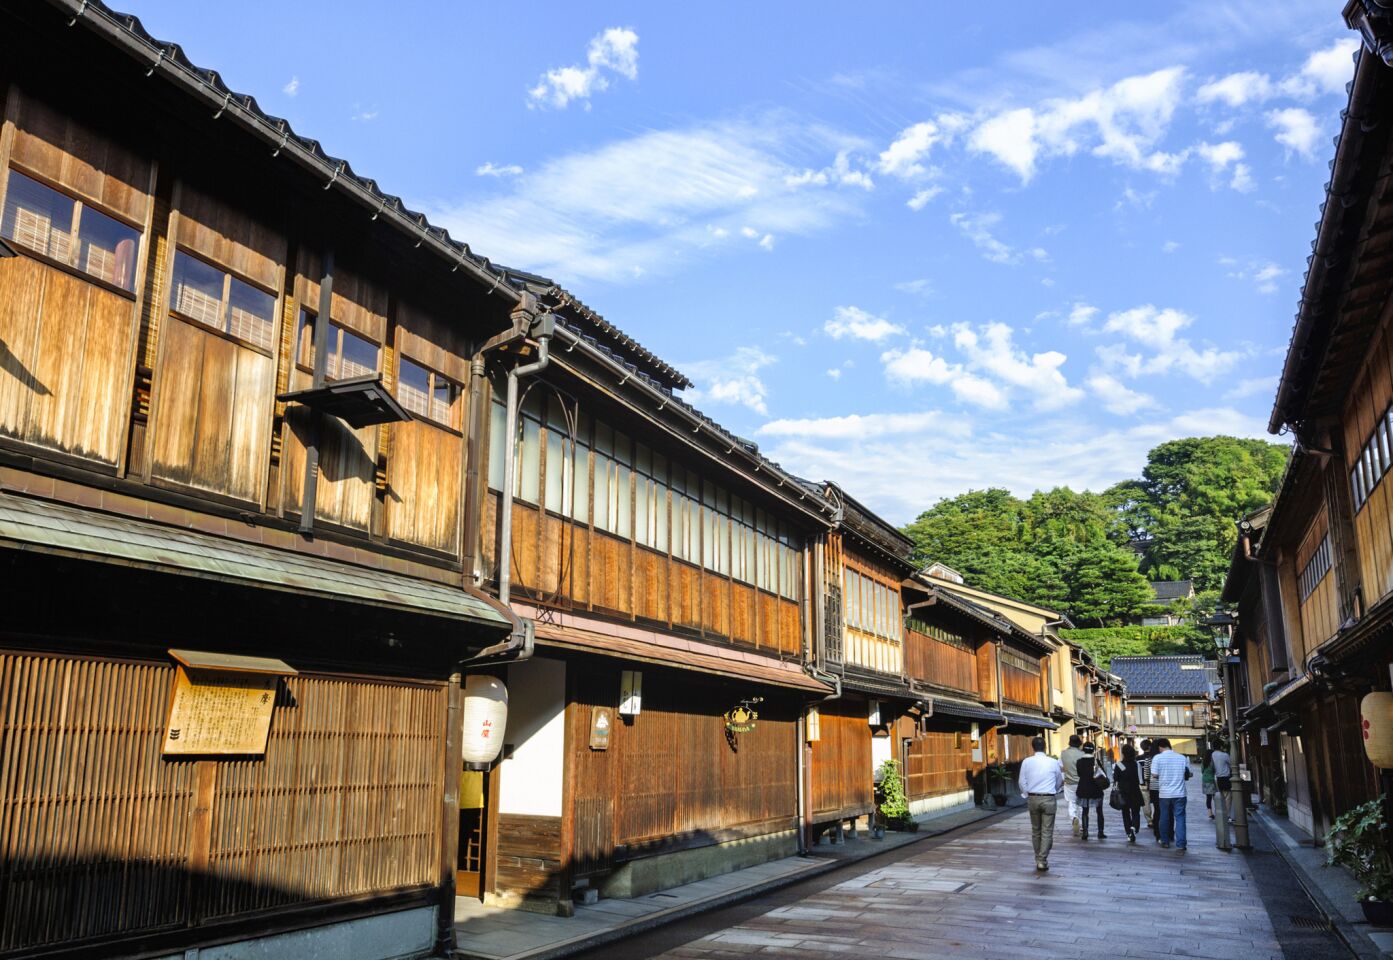 Historic geisha and tea houses in Kanazawa, Japan. New bullet-train service will shorten travel times from Tokyo from four hours to two hours and 30 minutes.